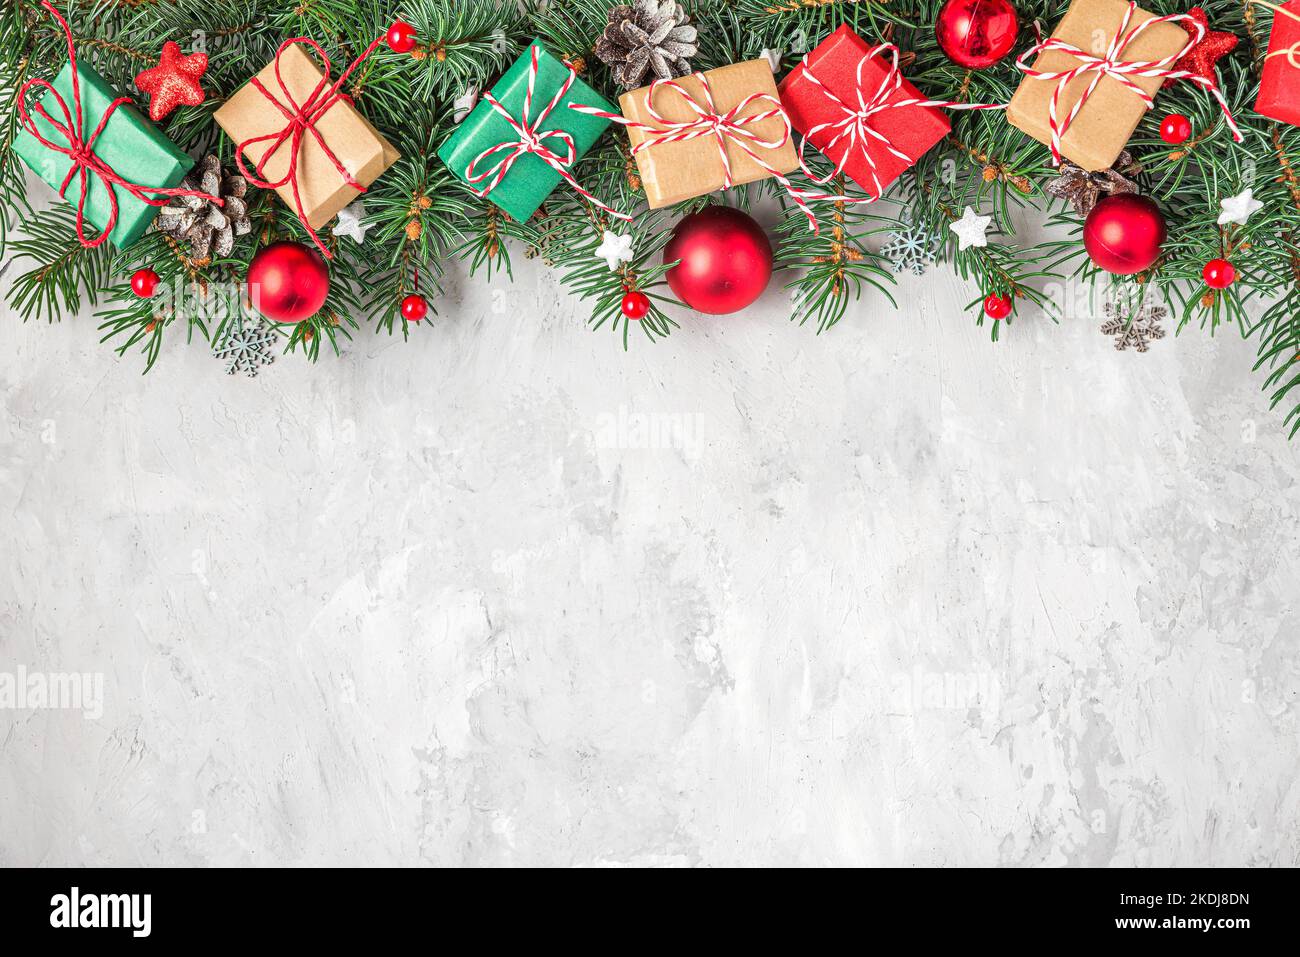 Christmas background with fir tree, holiday decorations, gift boxes on gray concrete background. Flat lay. Top view with copy space. Festive backgroun Stock Photo